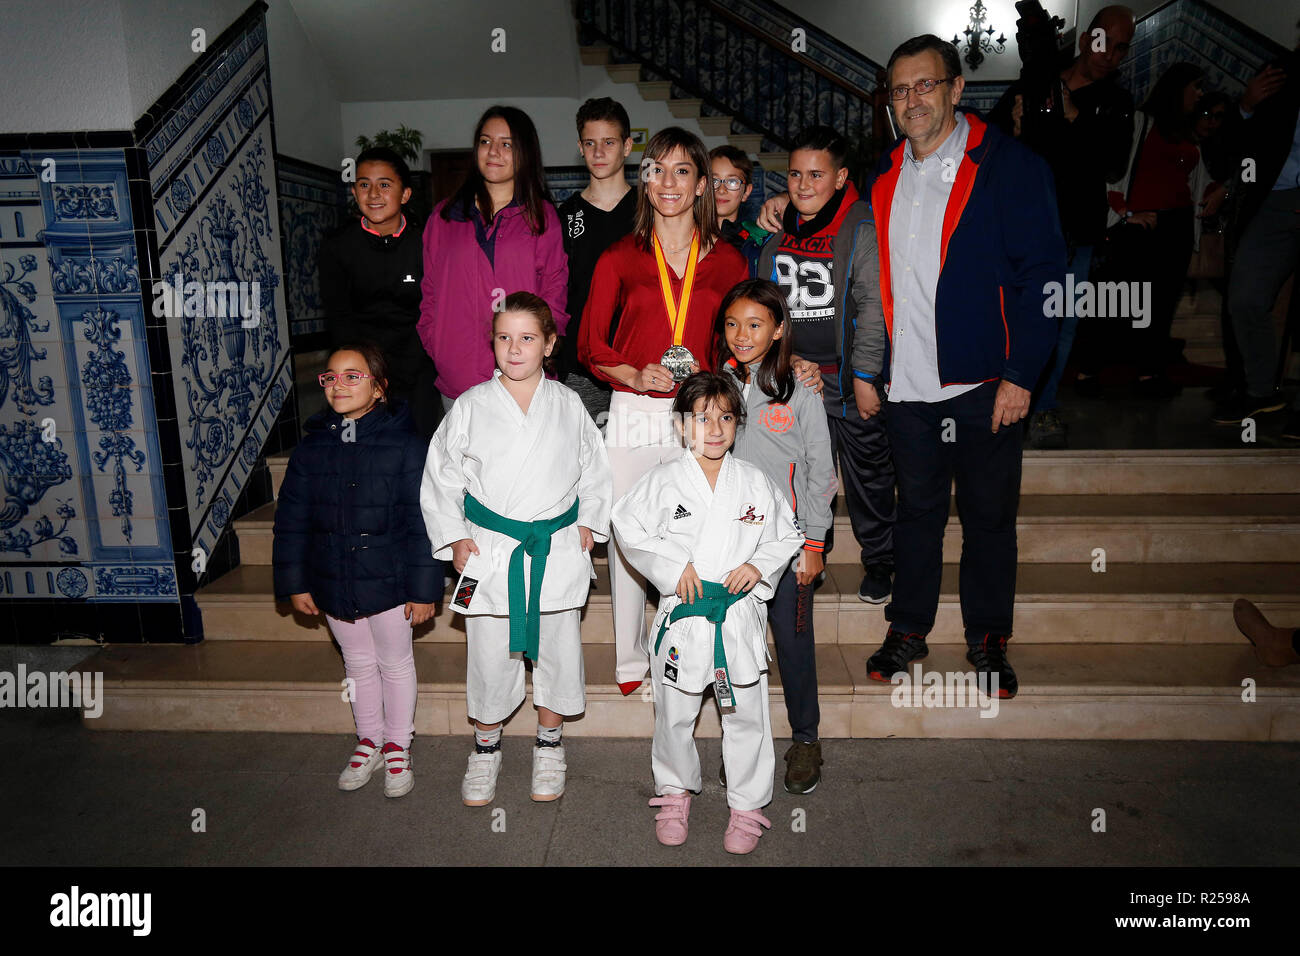 Spanish Karateka Sandra Sanchez seen posing for a photo with friends and family during the celebrations at her home town in Talavera de la Reina. Stock Photo